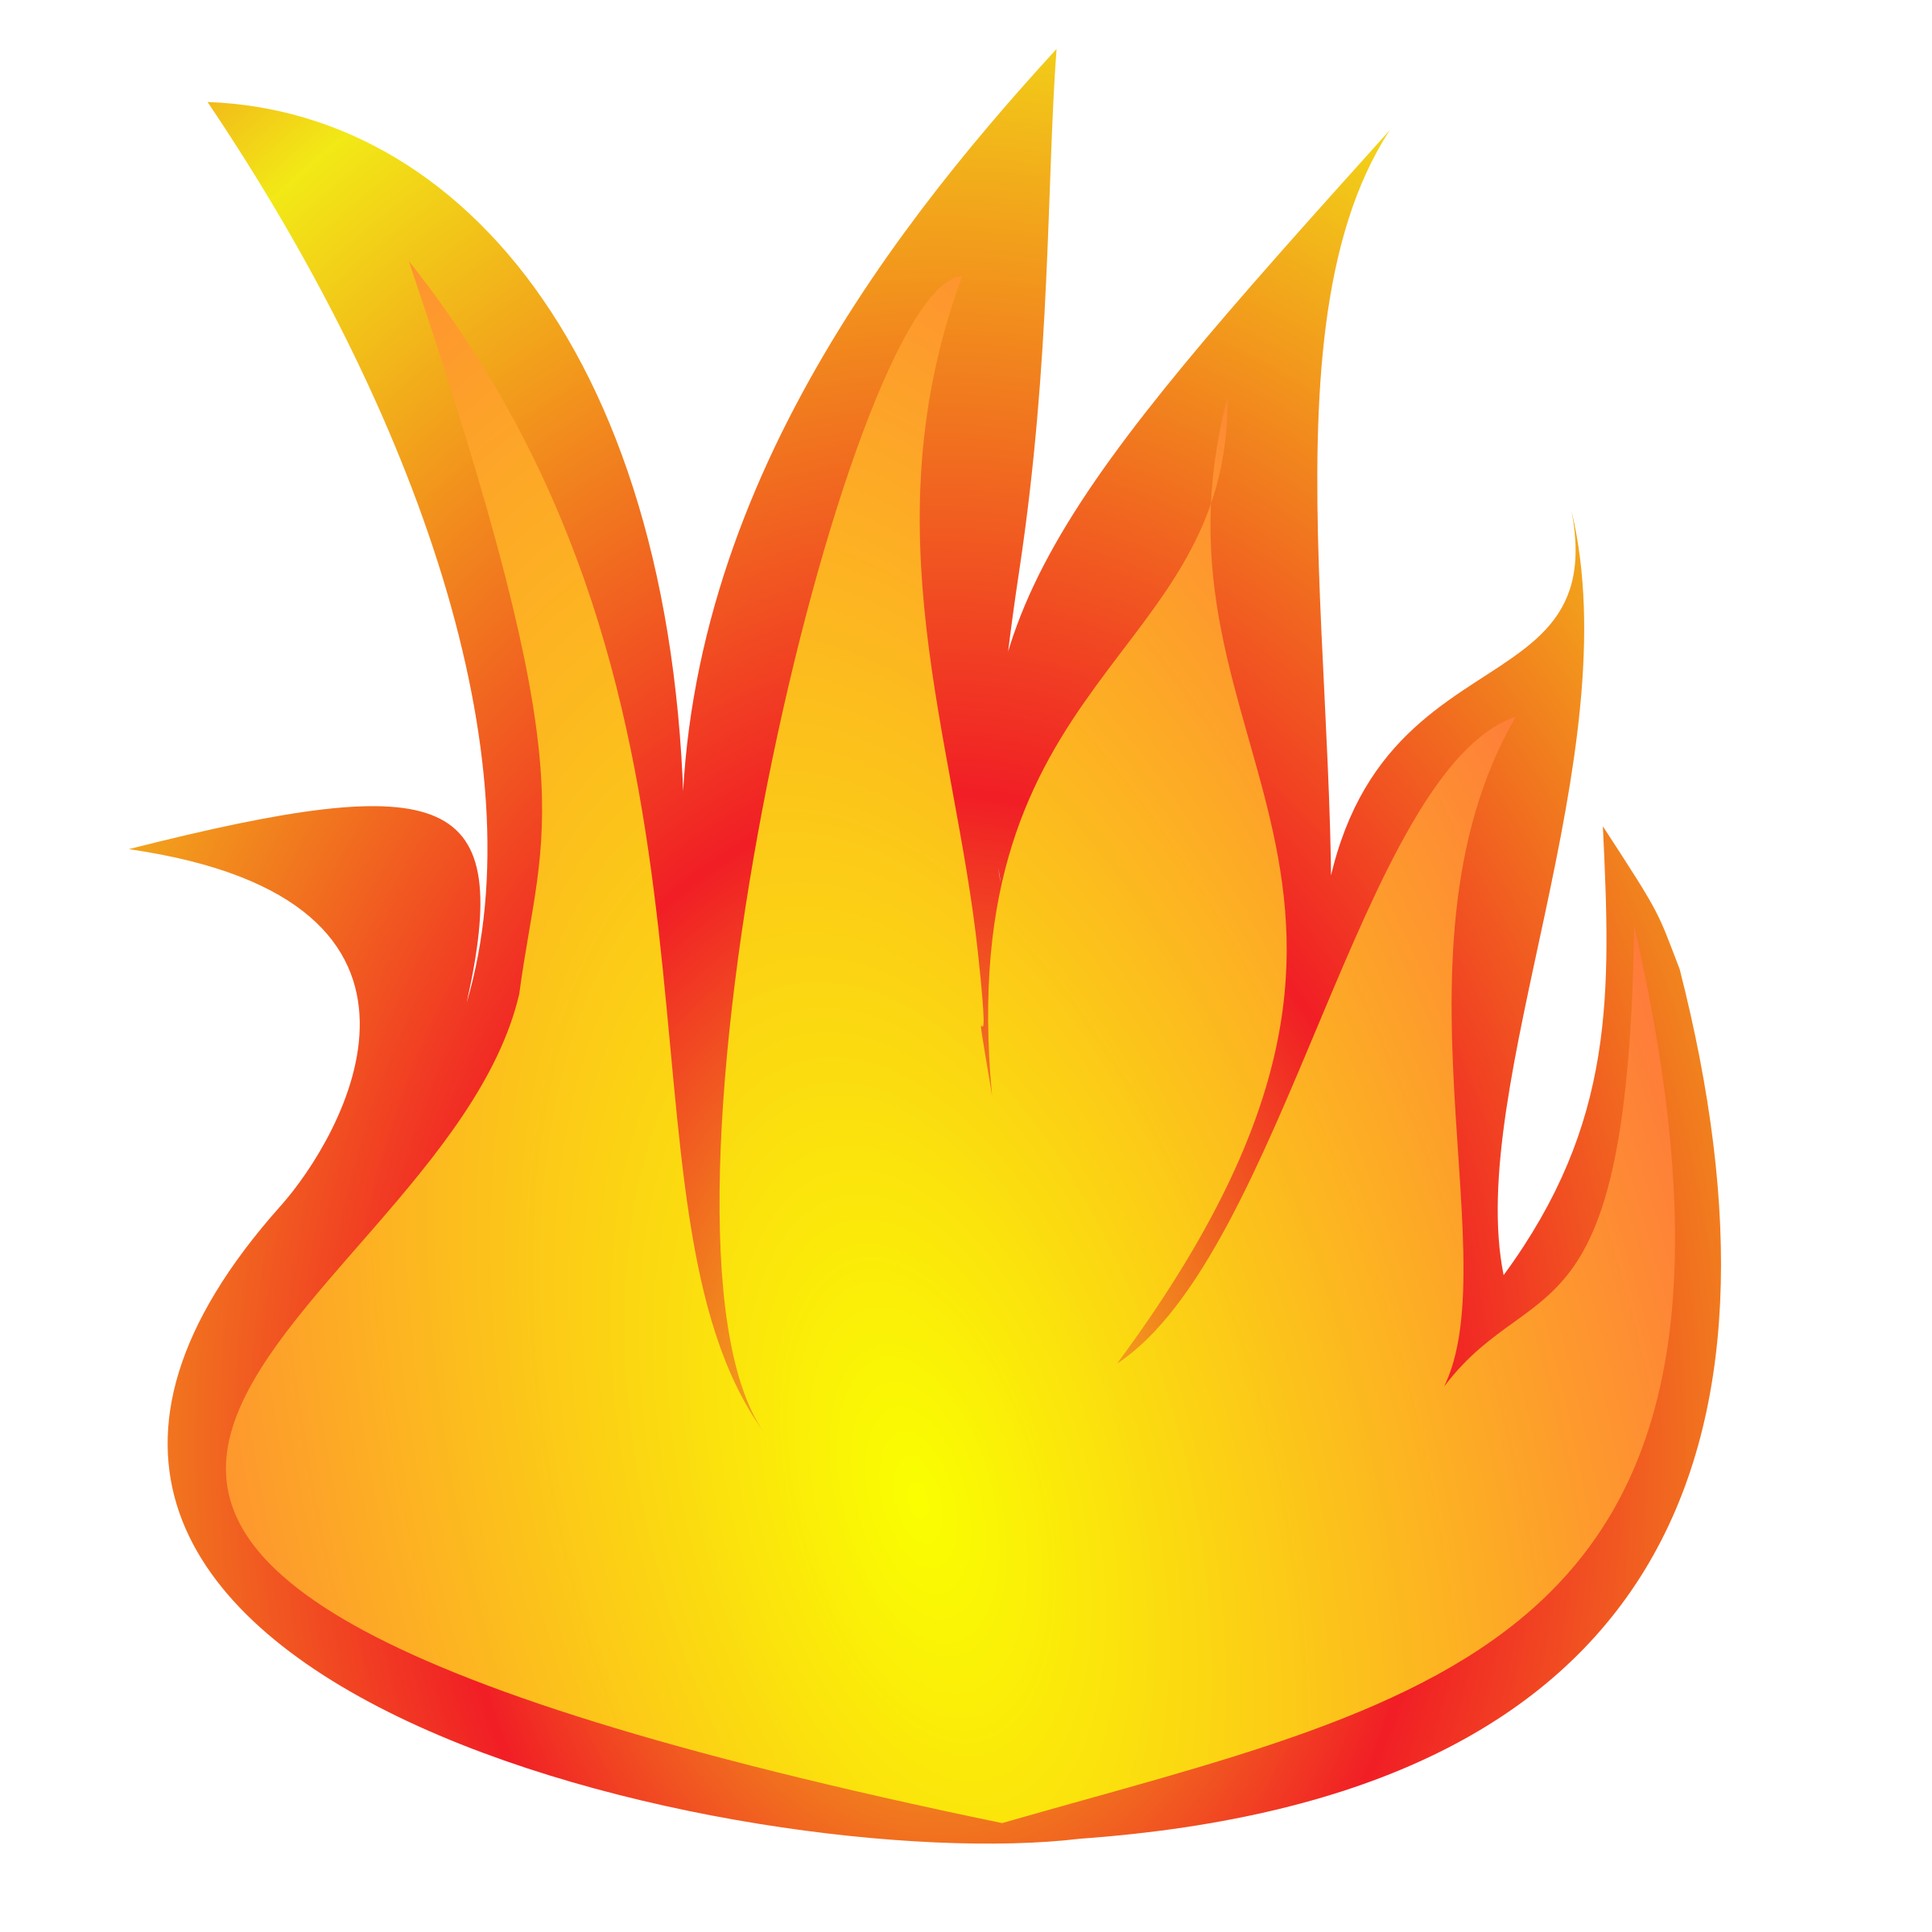 Flame Clipart  Flame Clip Art Image 